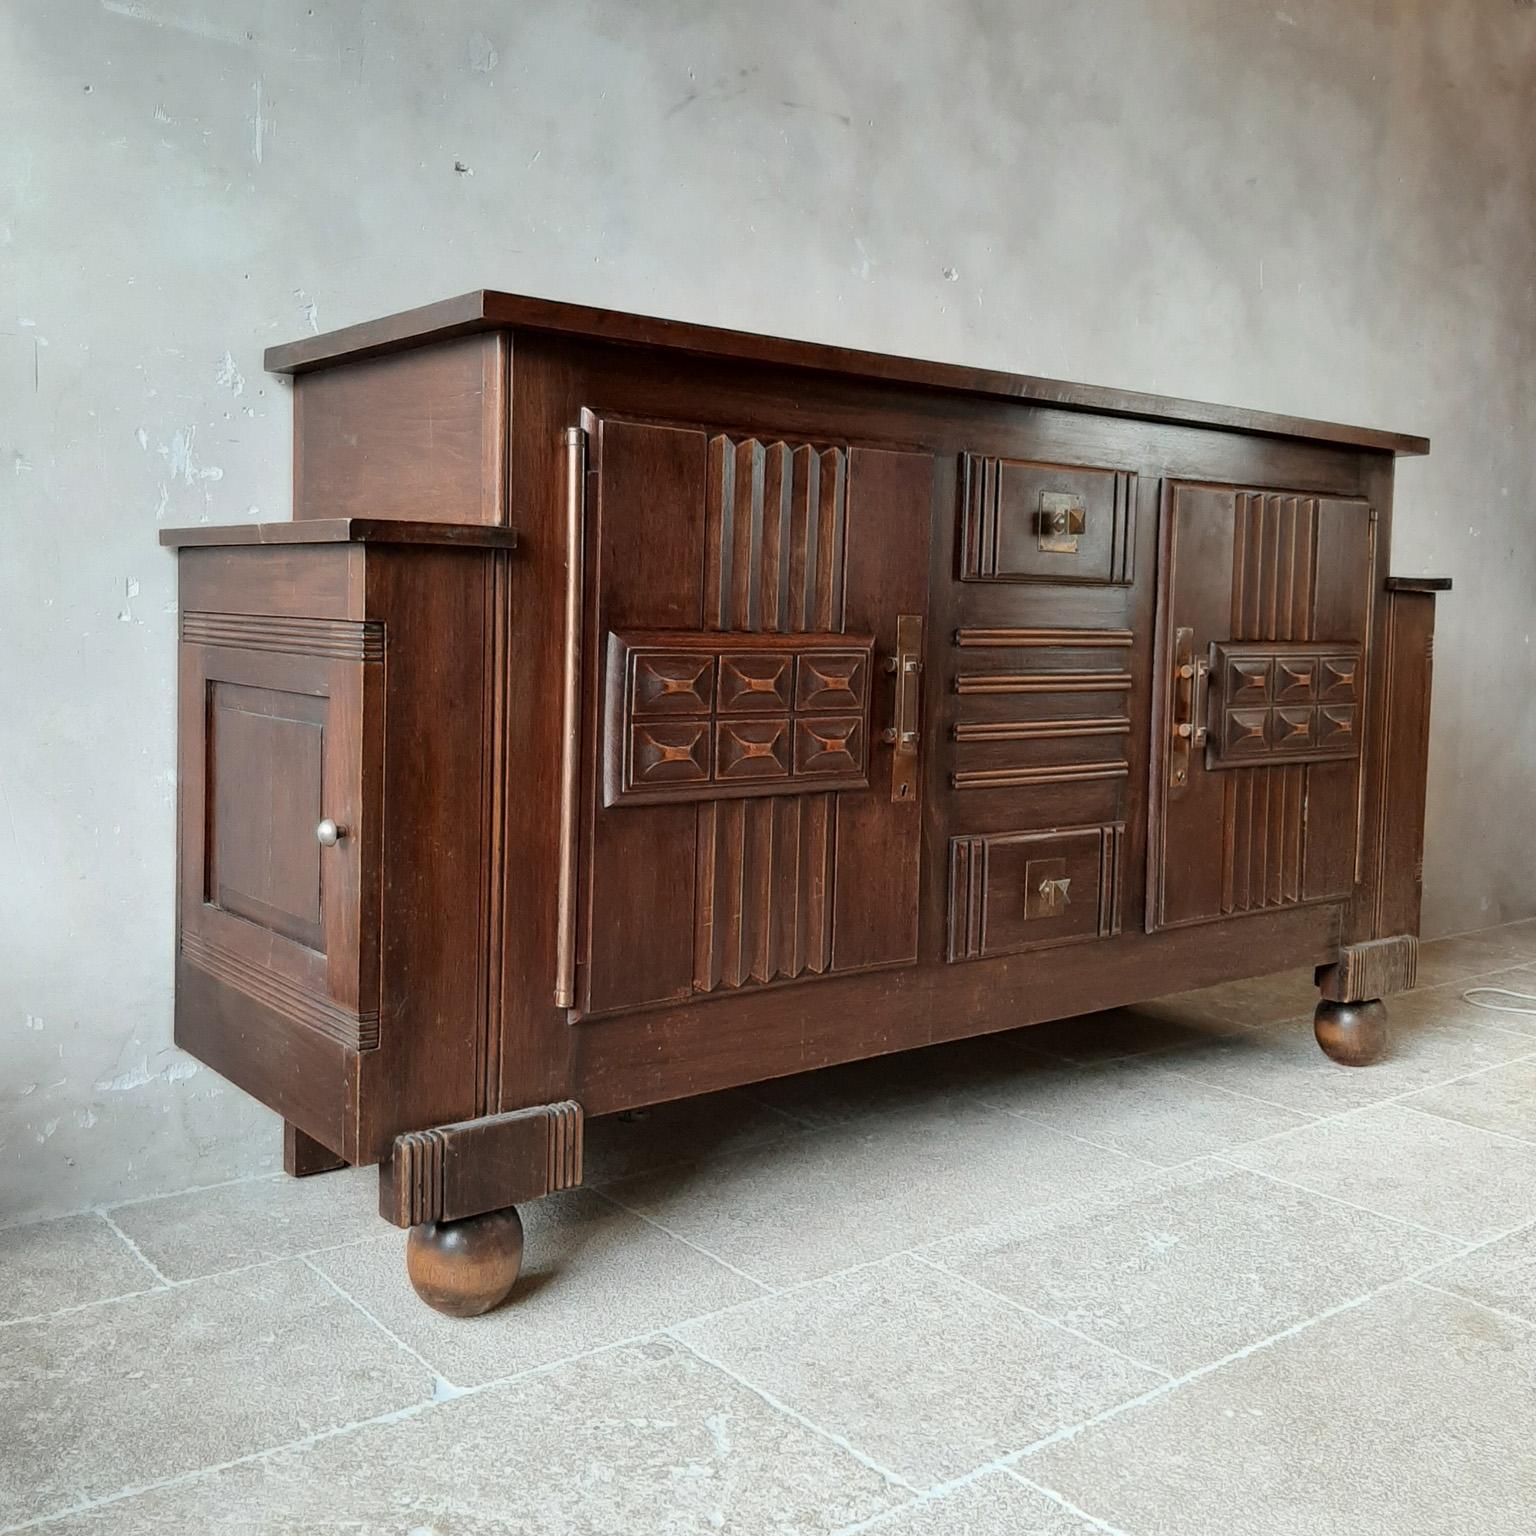 Brutalist style brown oak sideboard, credenza by Charles Dudouyt, 1940s-1950s. This midcentury cabinet features 2 large doors on each side, and in the middle 2 drawers with large storagespace inside. The doors and drawers panels are beautifully